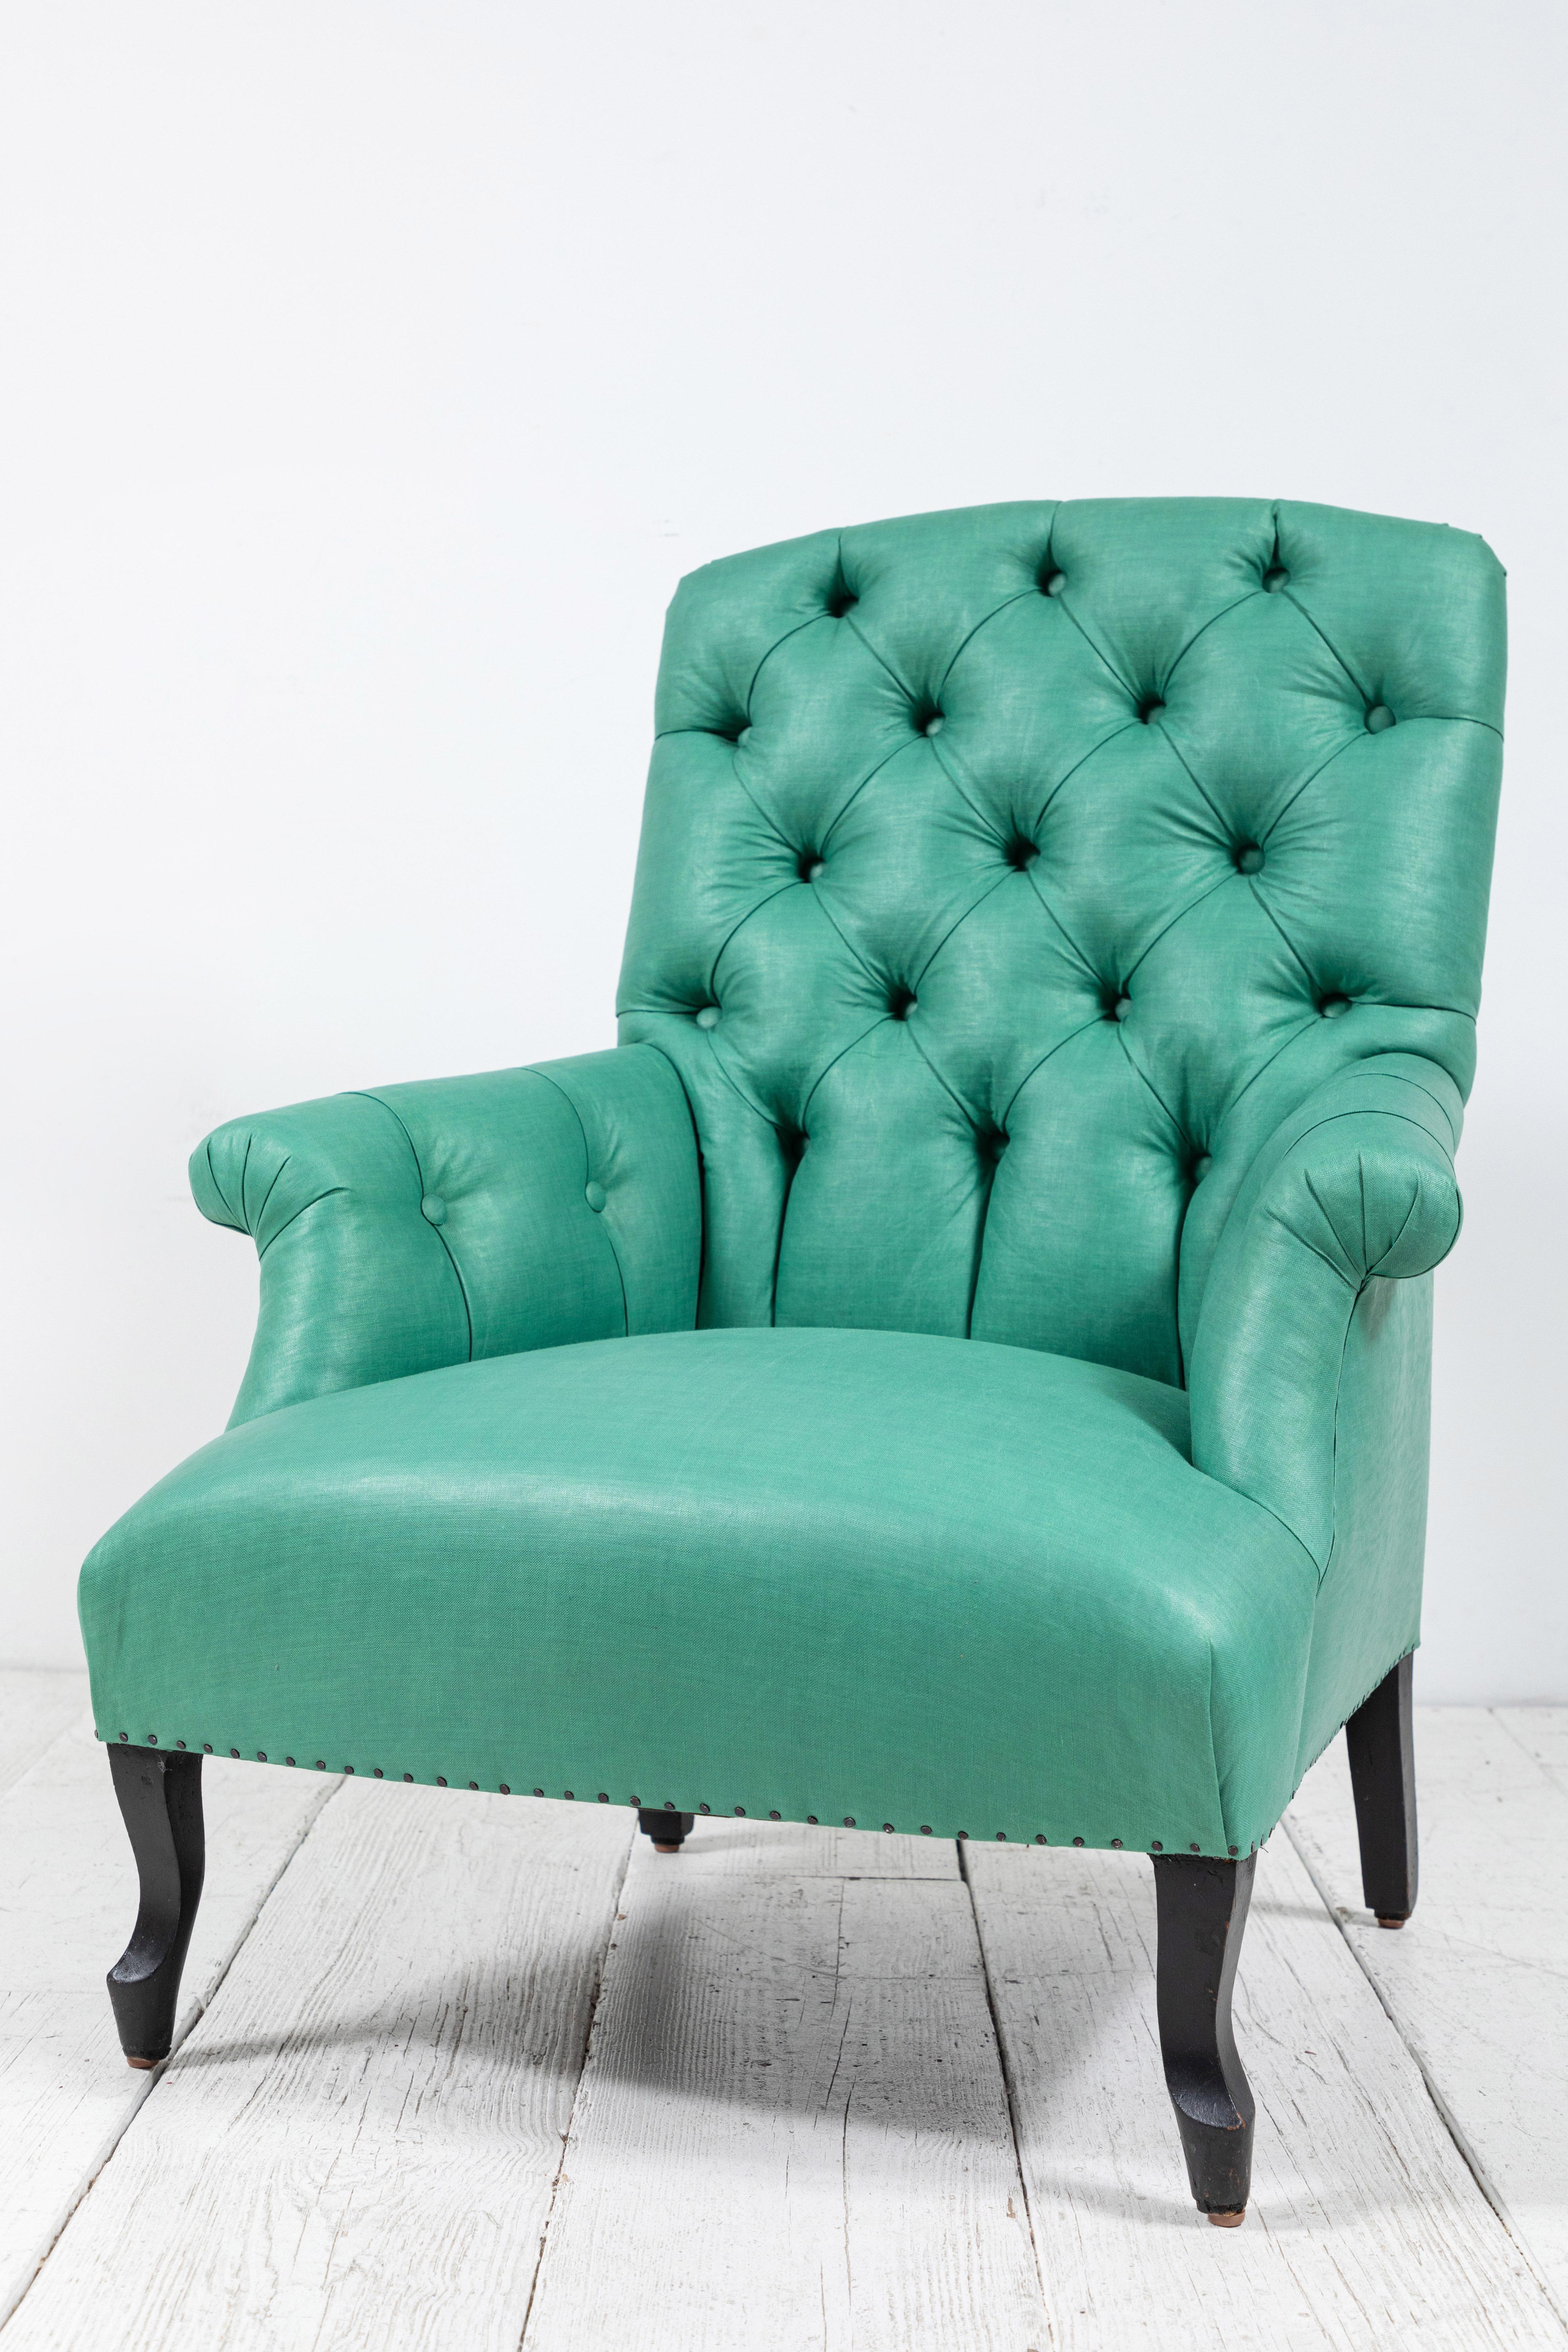 Wood Pair of Green French Tufted Club Chairs